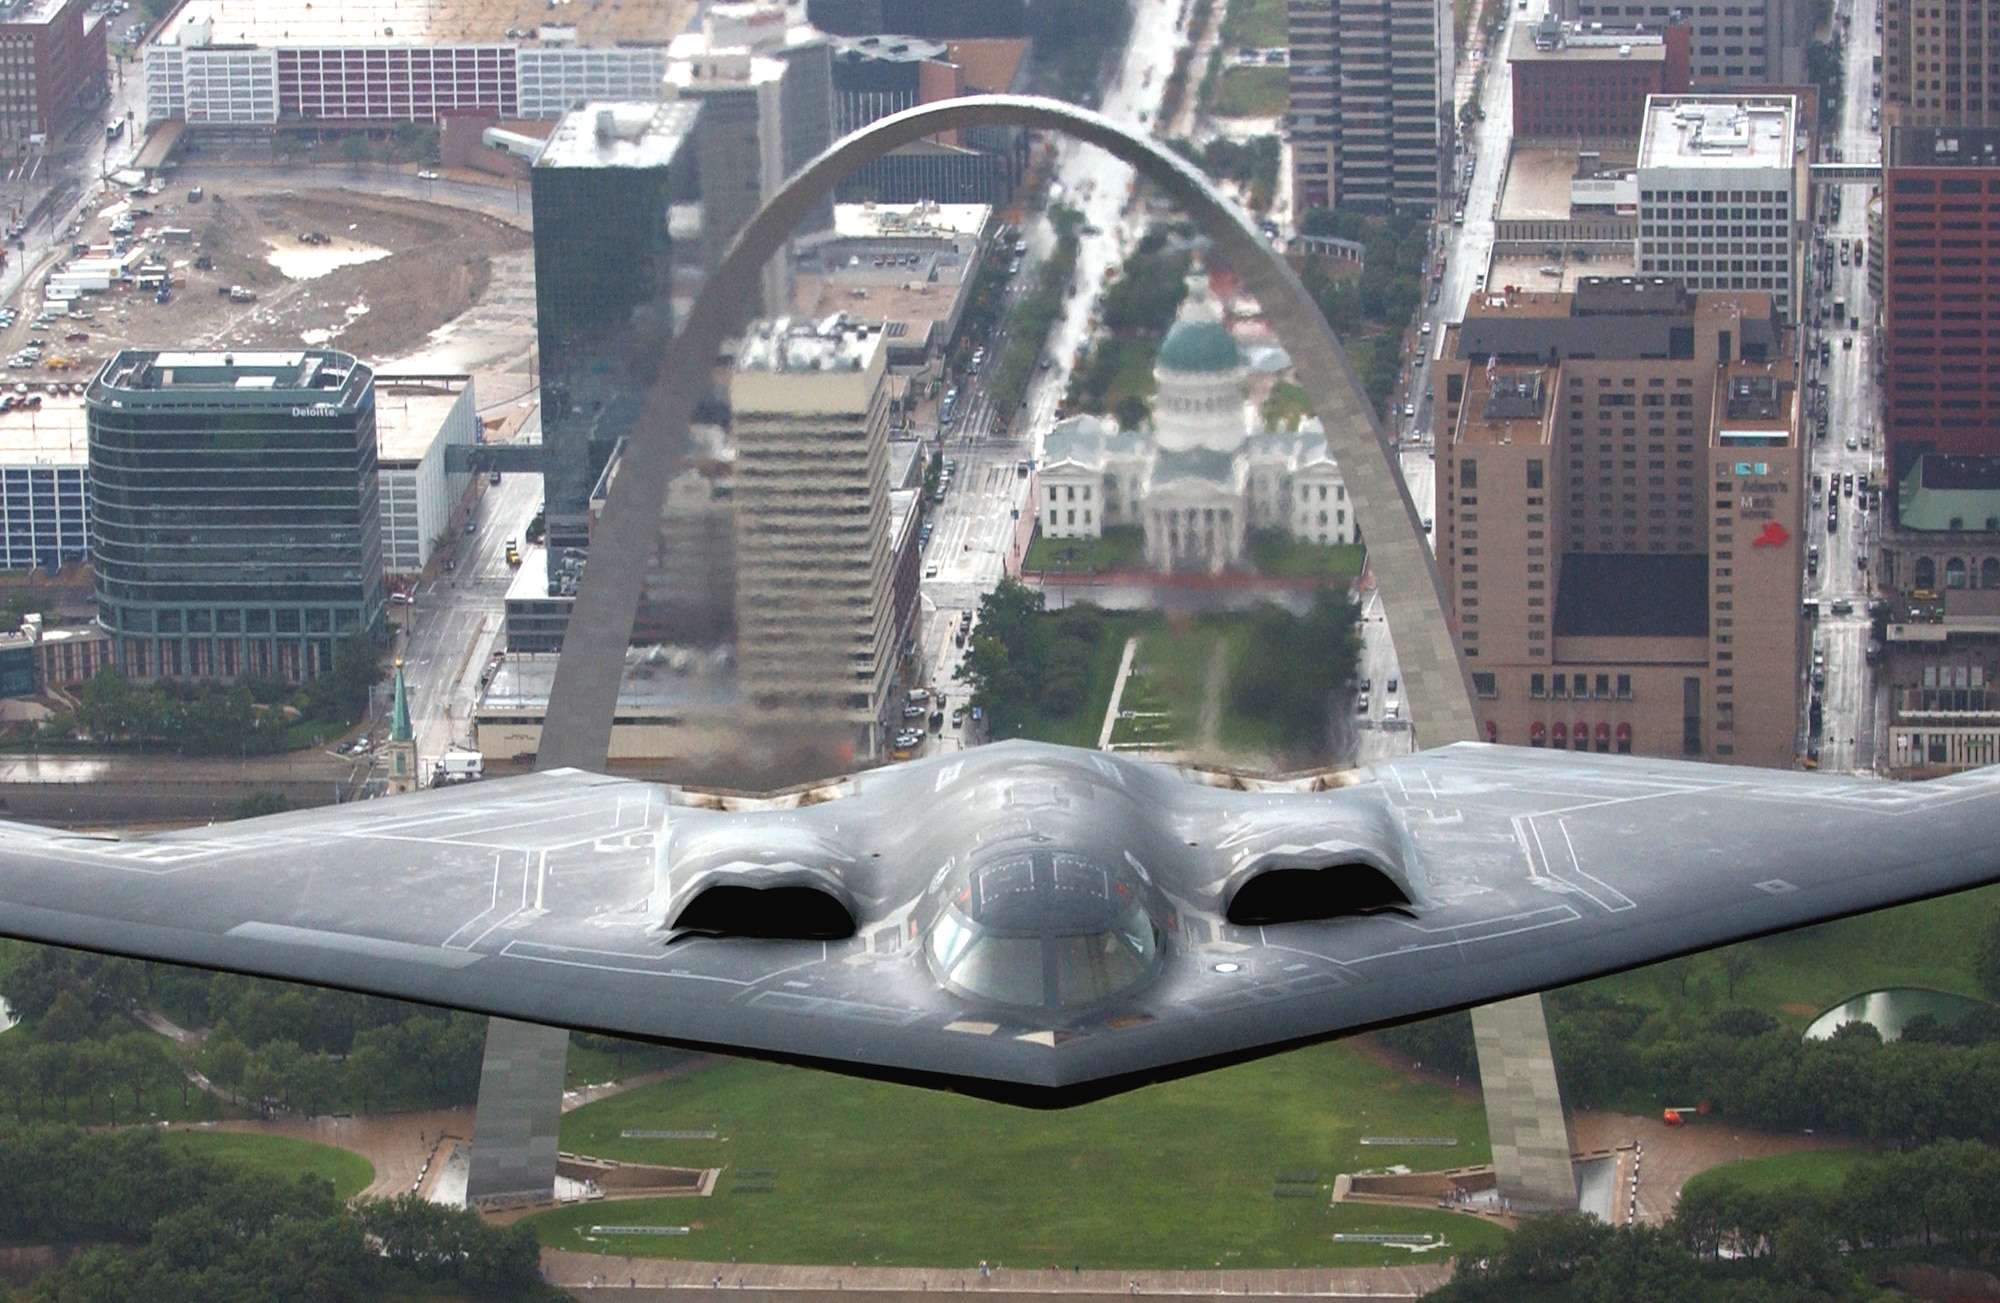 A B-2 Stealth bomber from the 509th Bomb Wing at Whiteman Air Force Base, Mo., flies over the St. Louis Arch on Aug. 10, 2006. The B-2 flyover was one of several events celebrating Air Force Week in St. Louis. (U.S. Air Force photo/Tech. Sgt. Justin D. Pyle)